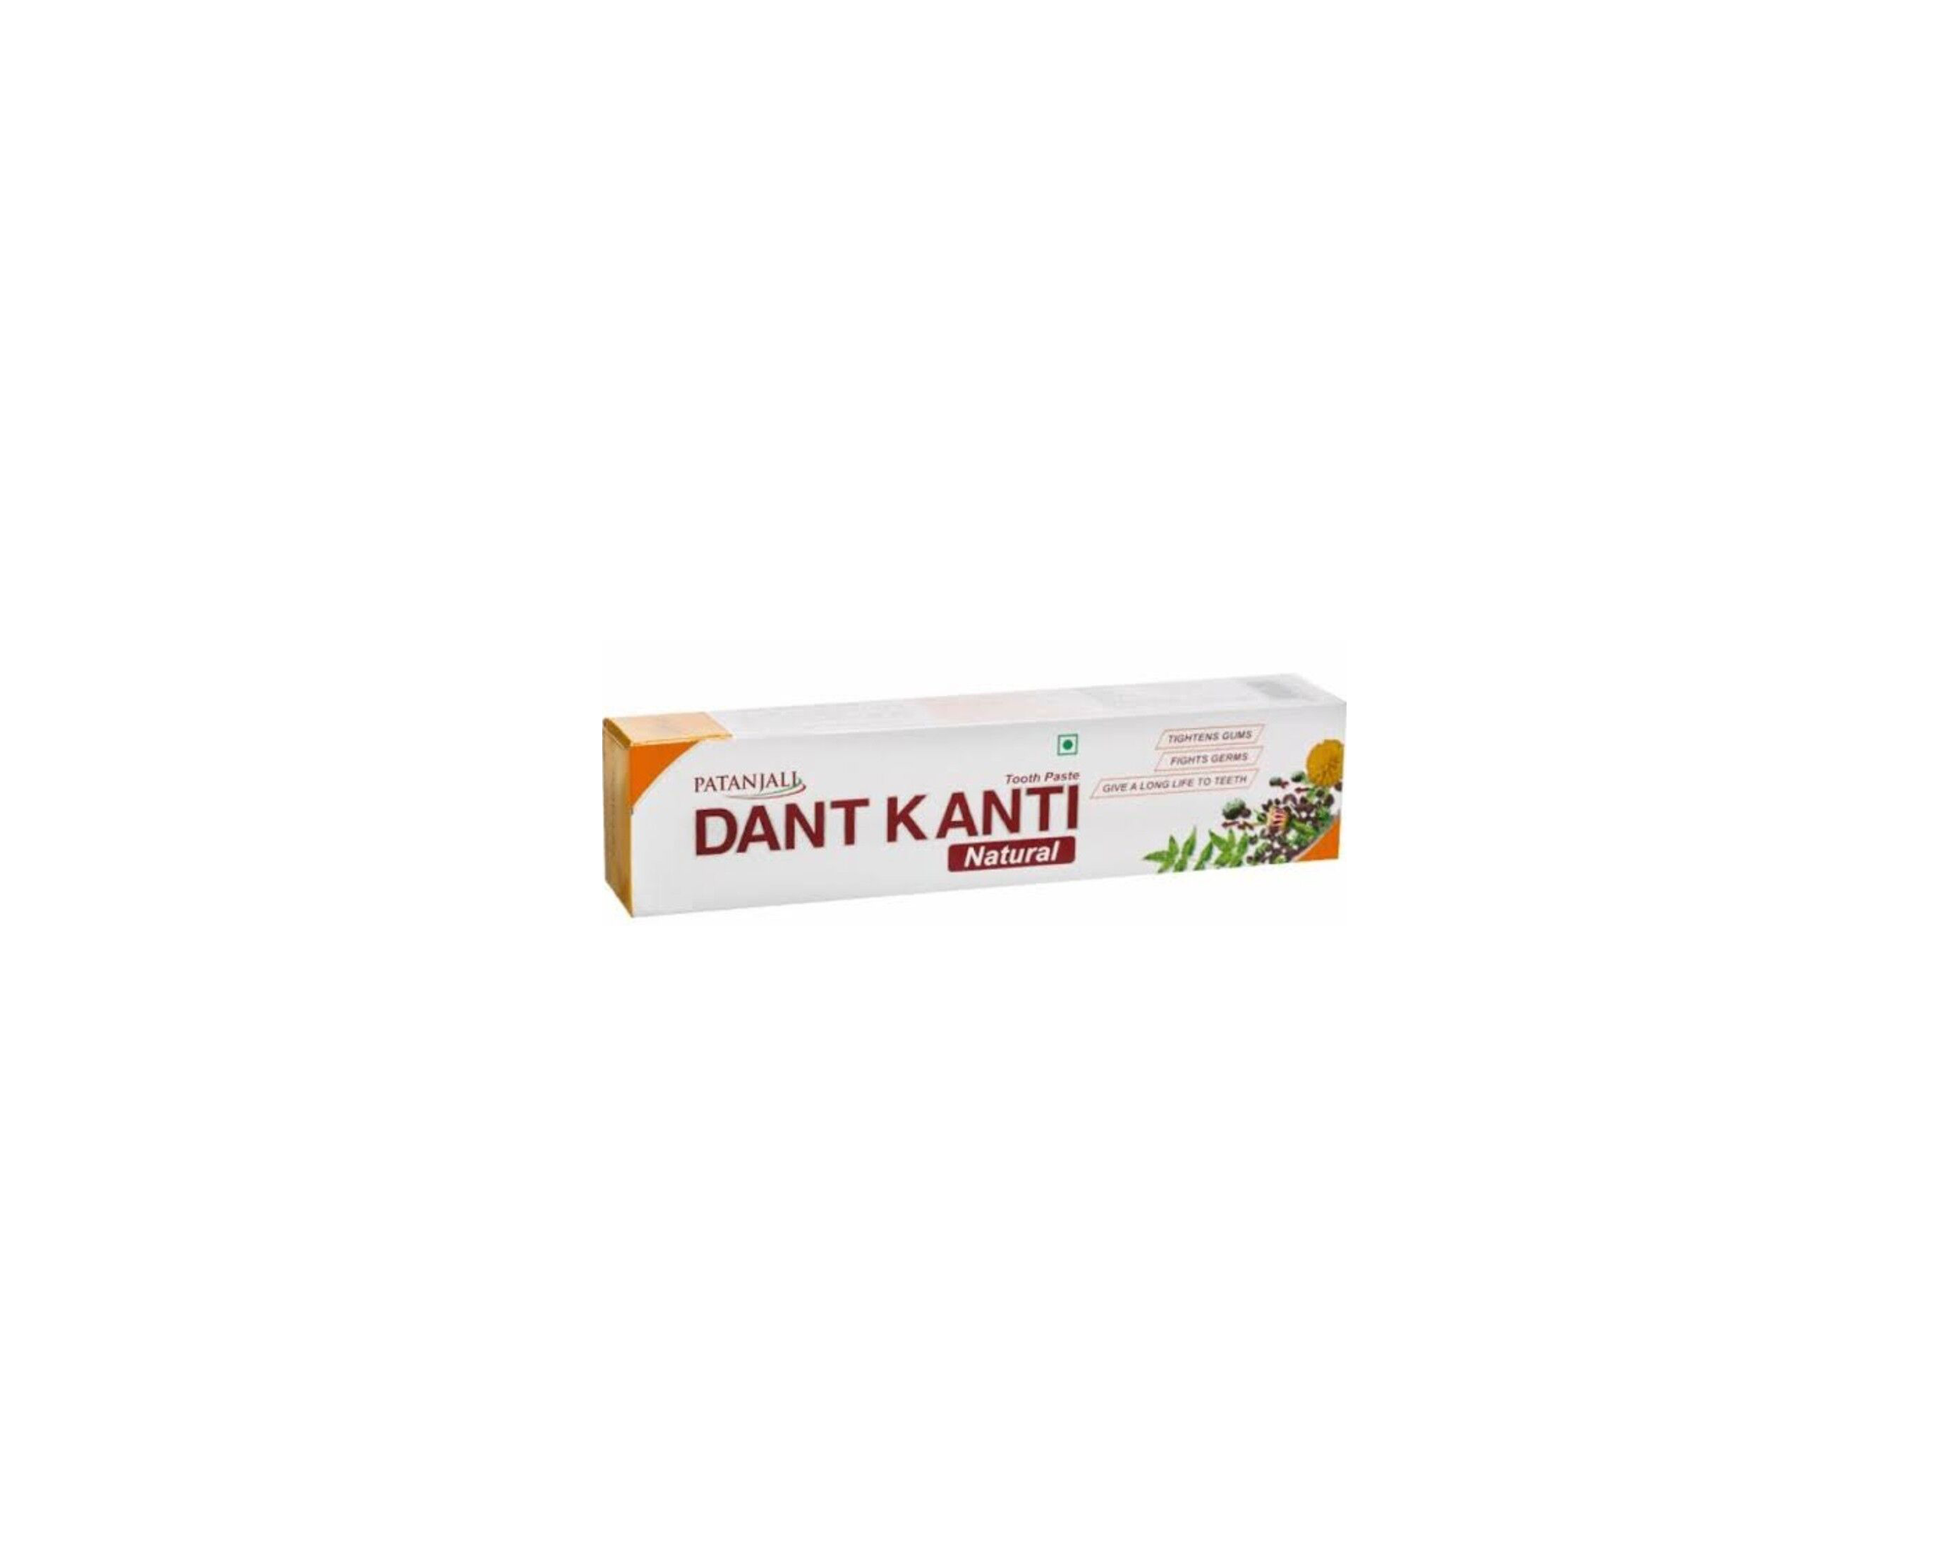 Patanjali Dant Kanti Tooth Paste 200g - Indian Spices